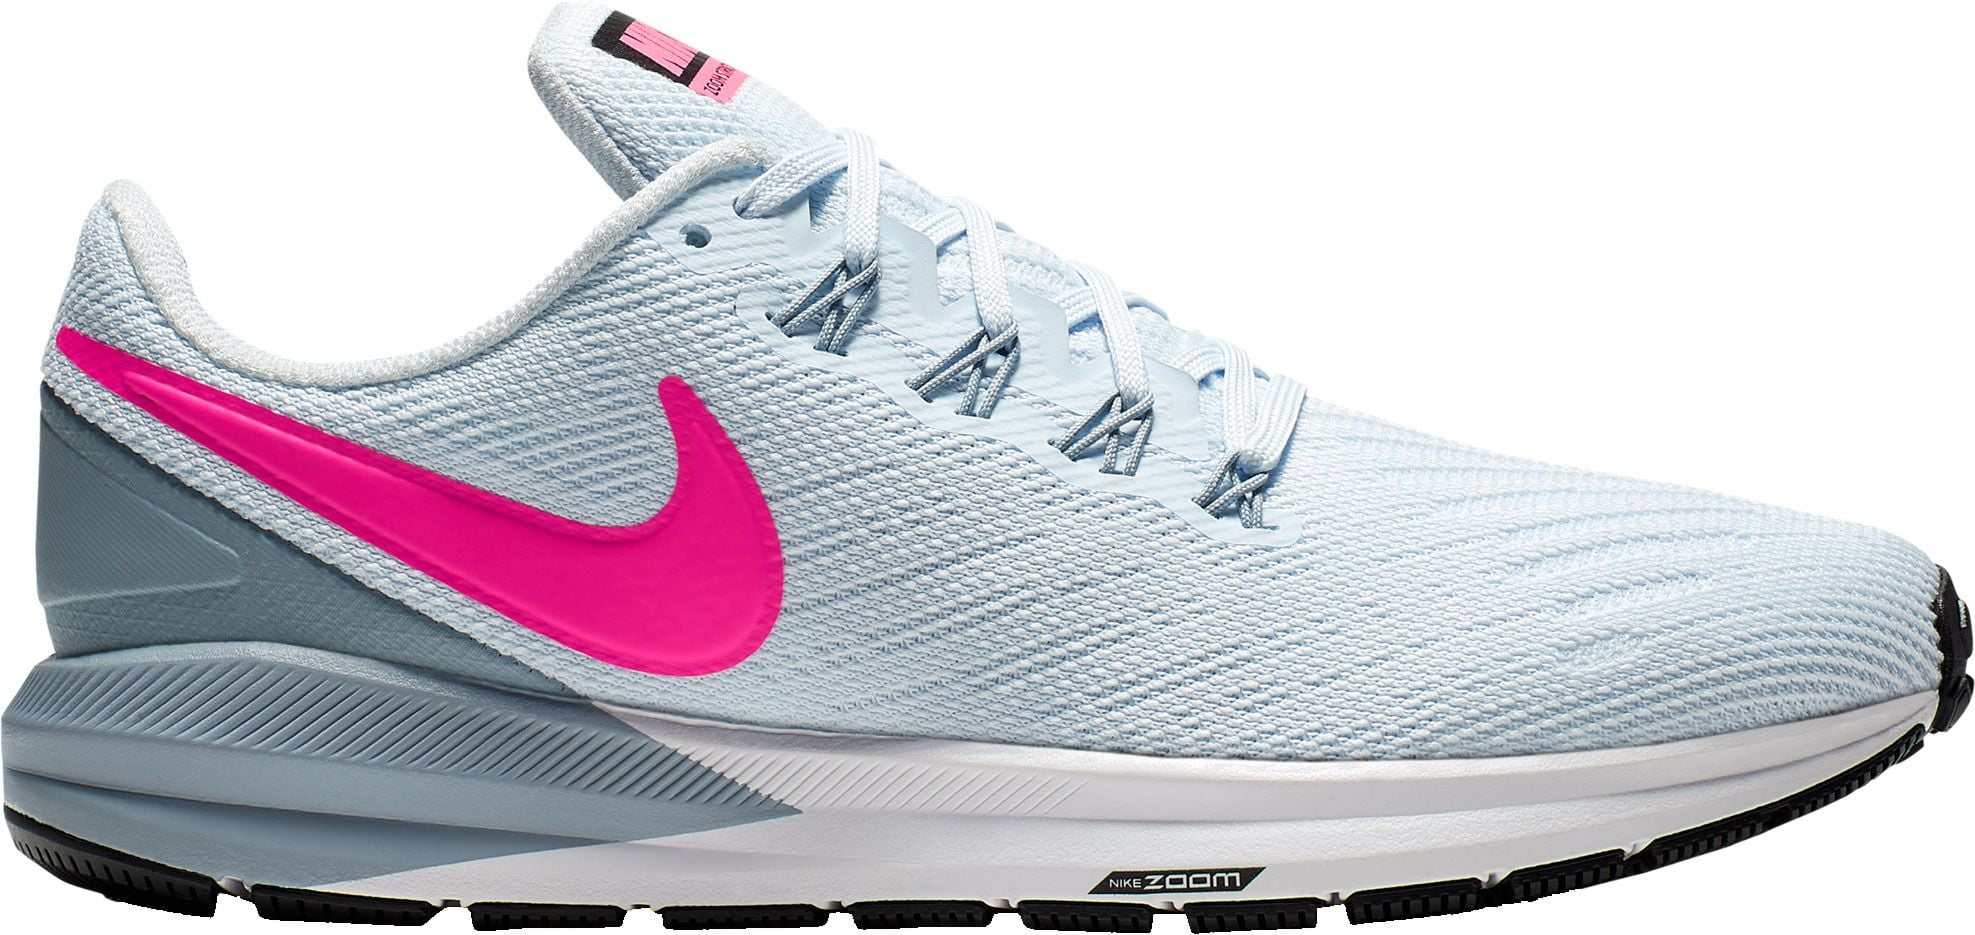 nike women's air zoom structure 22